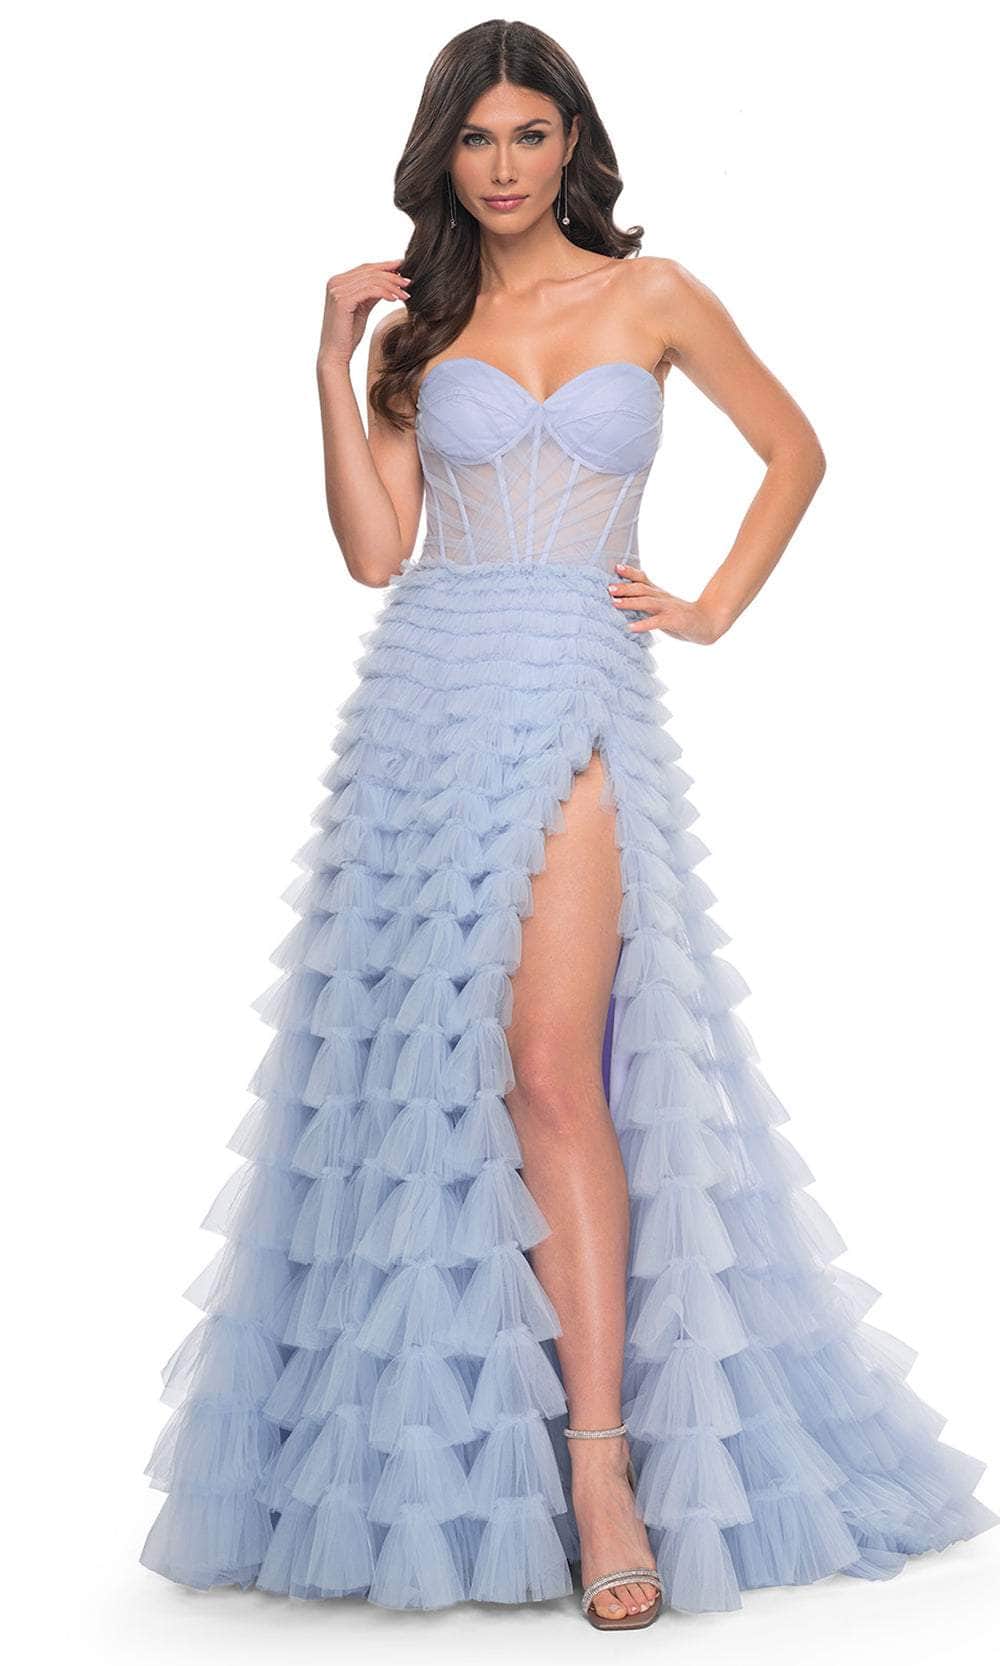 Image of La Femme 32447 - Sweetheart Tiered Tulle Prom Gown